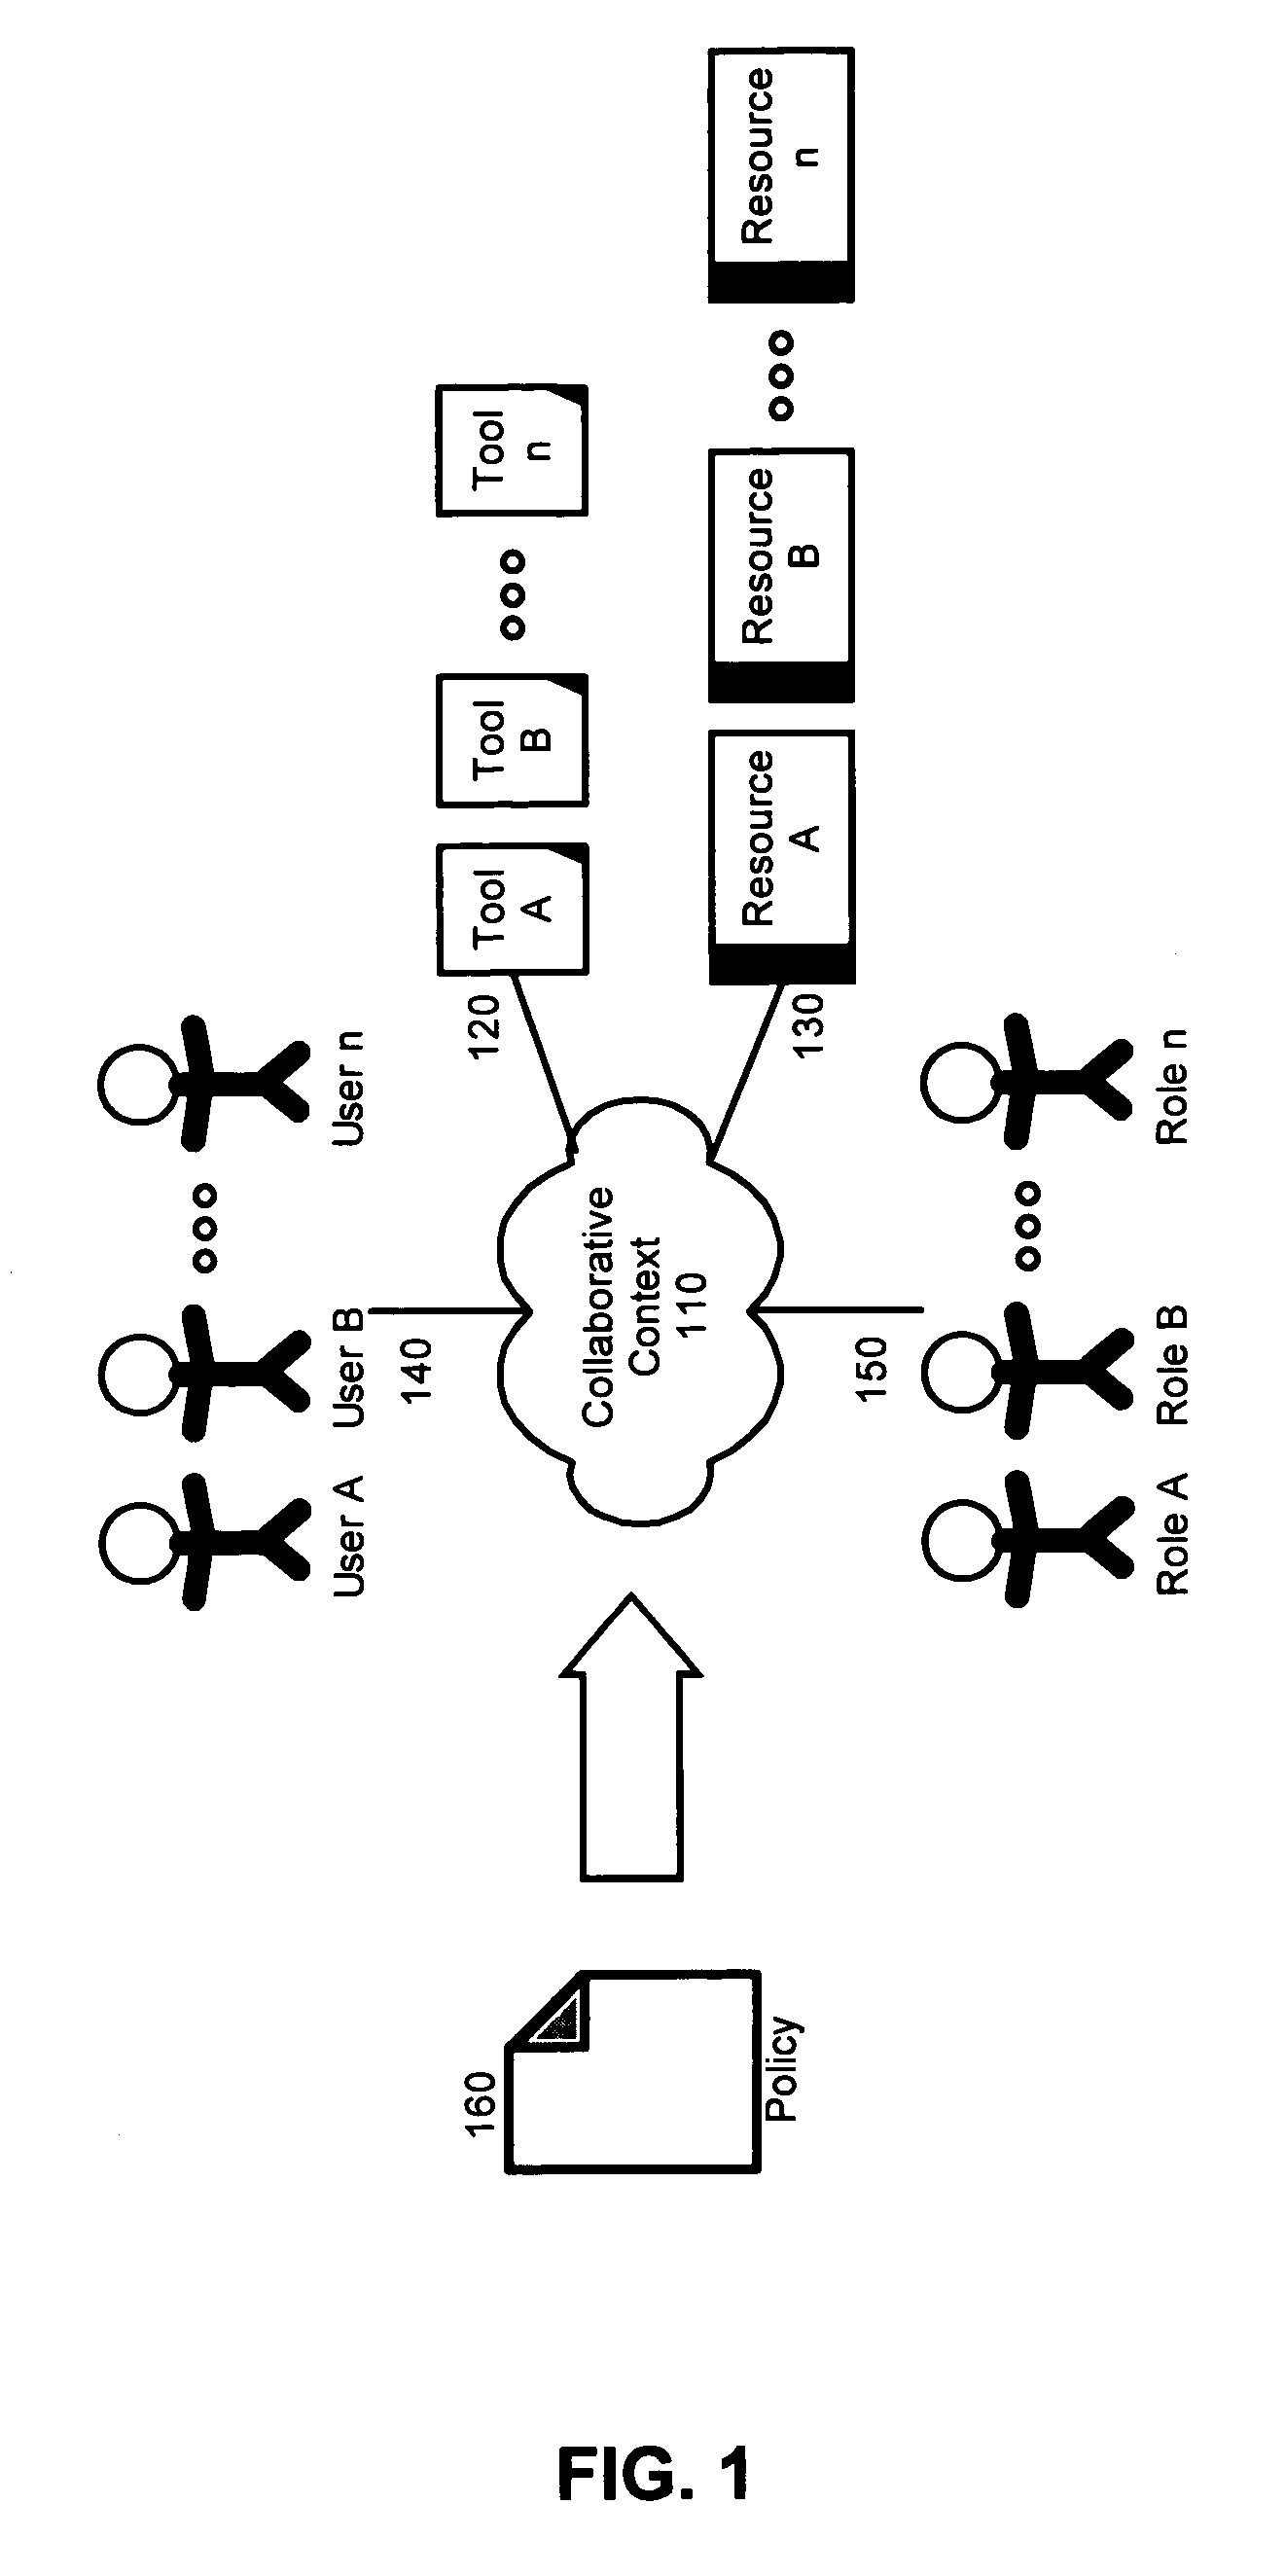 Policy based application provisioning in a collaborative computing environment